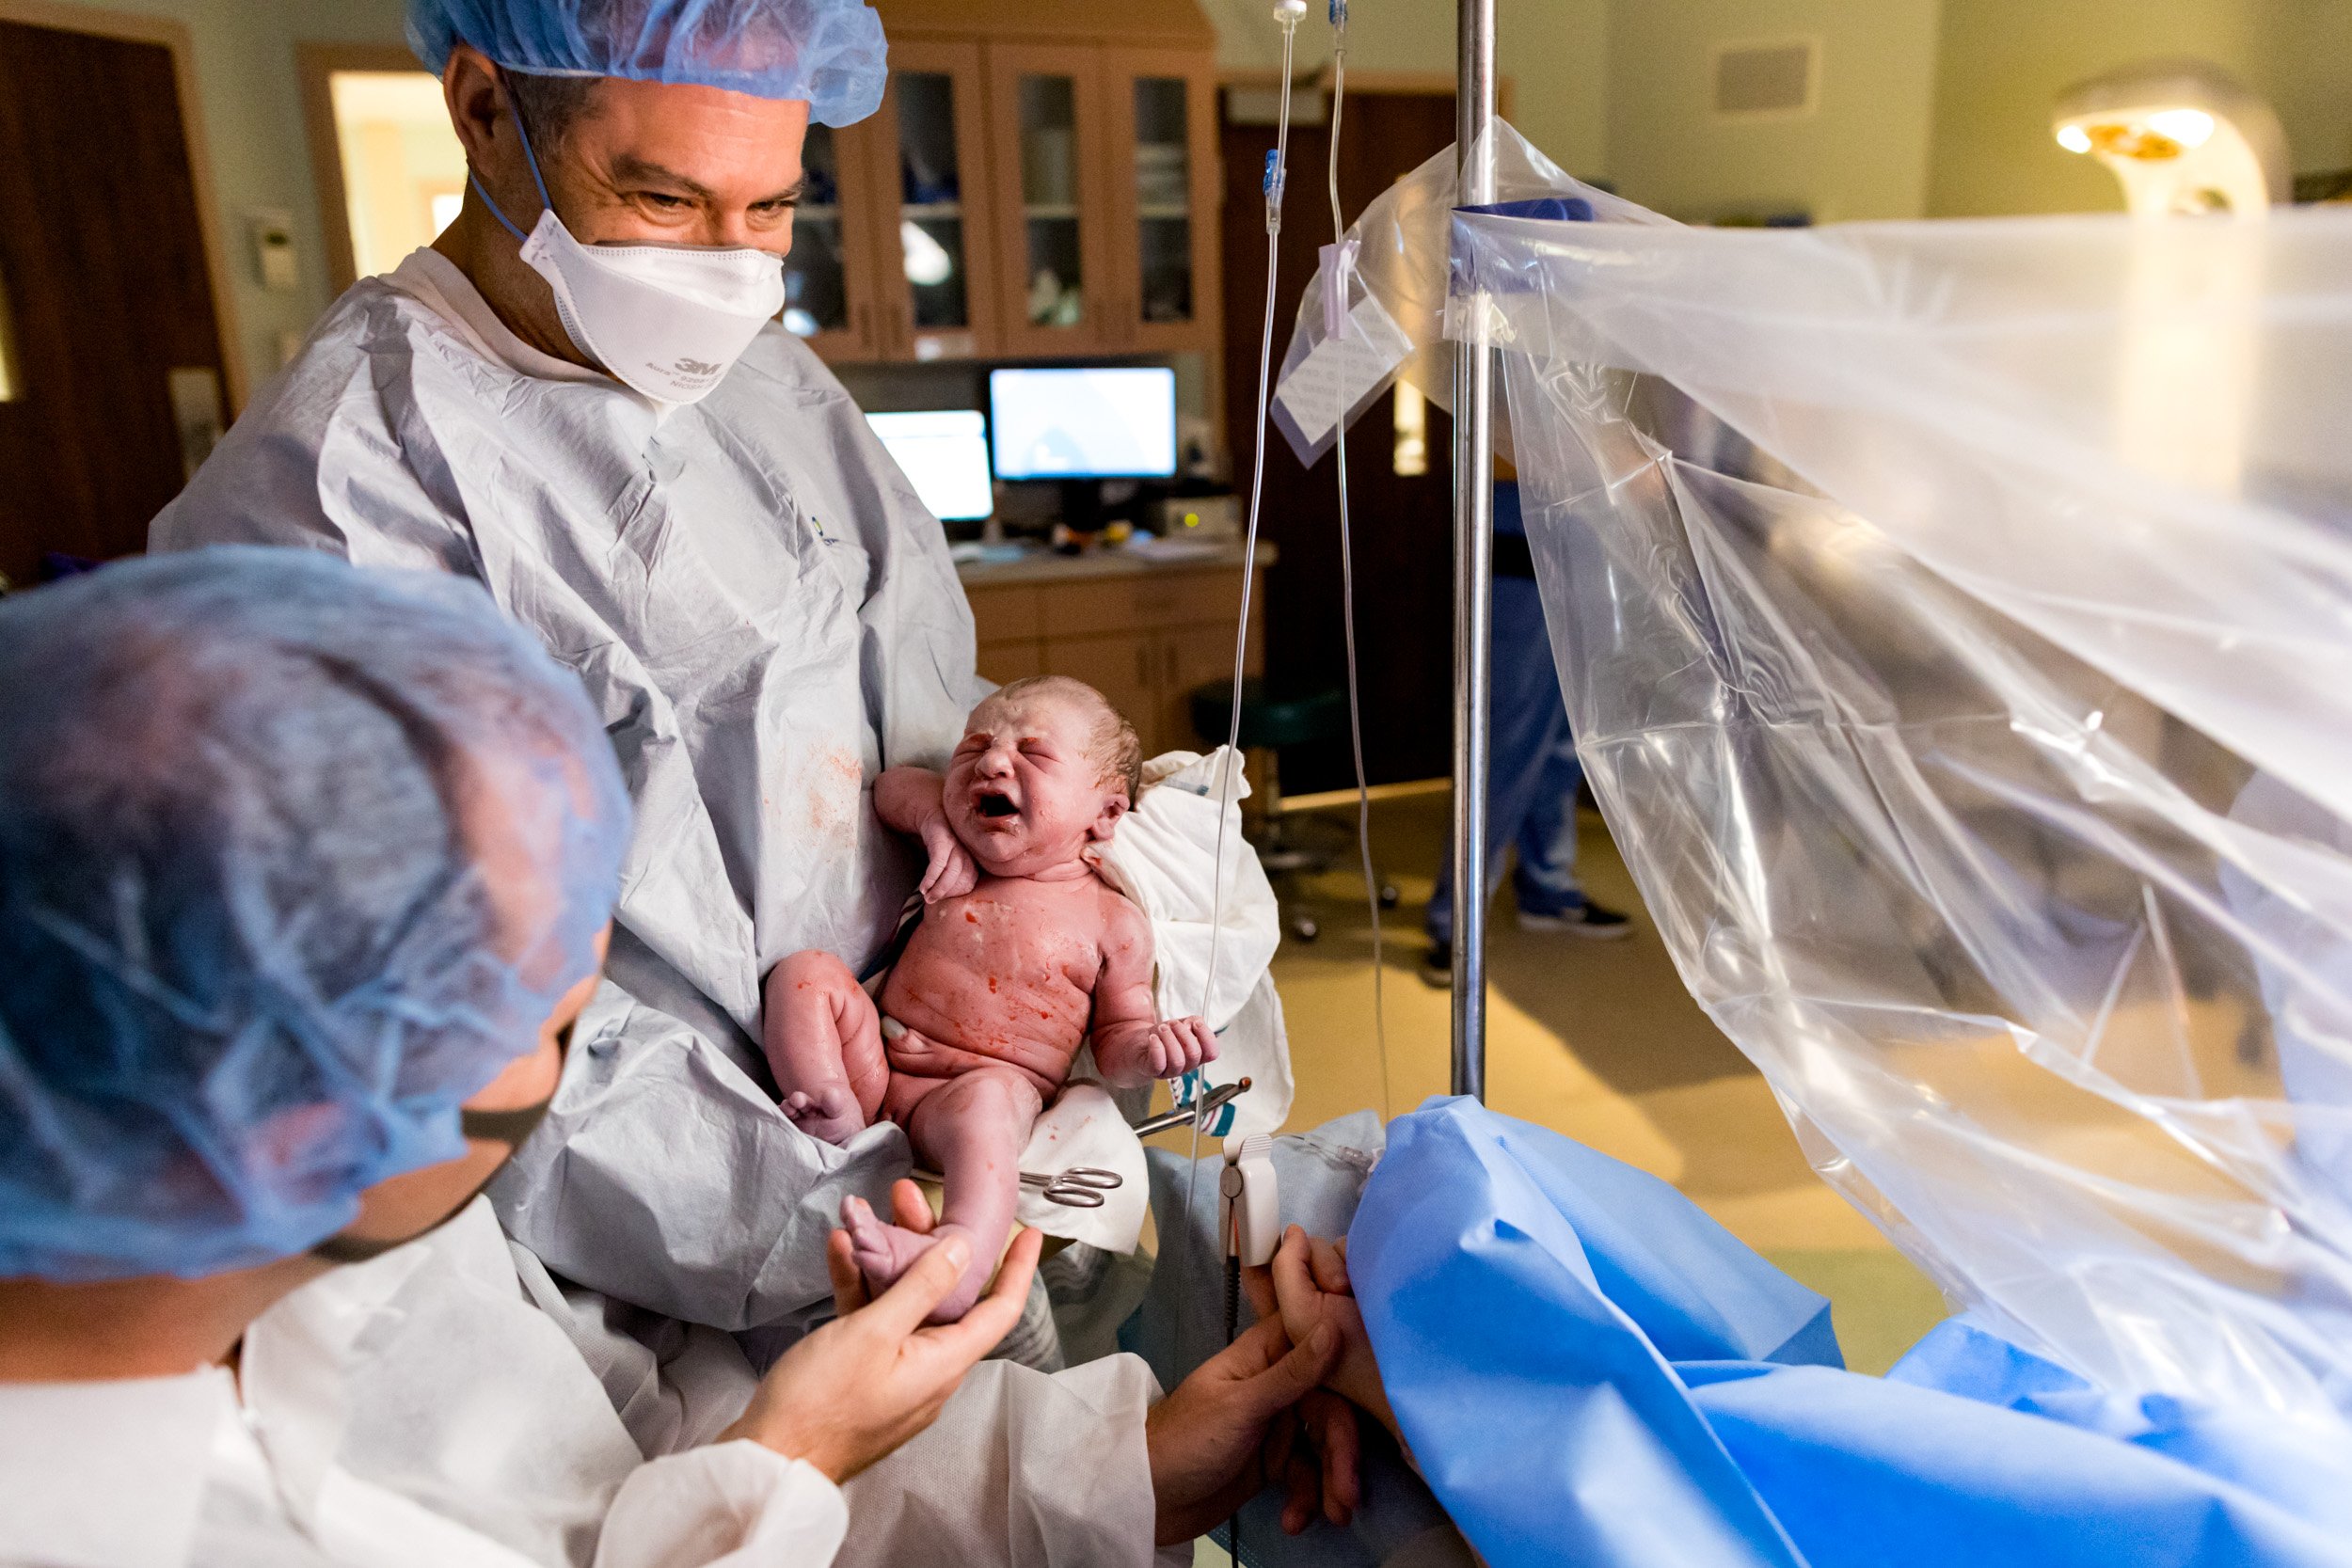 pediatrician holding baby for the parents to see just after birth in the OR